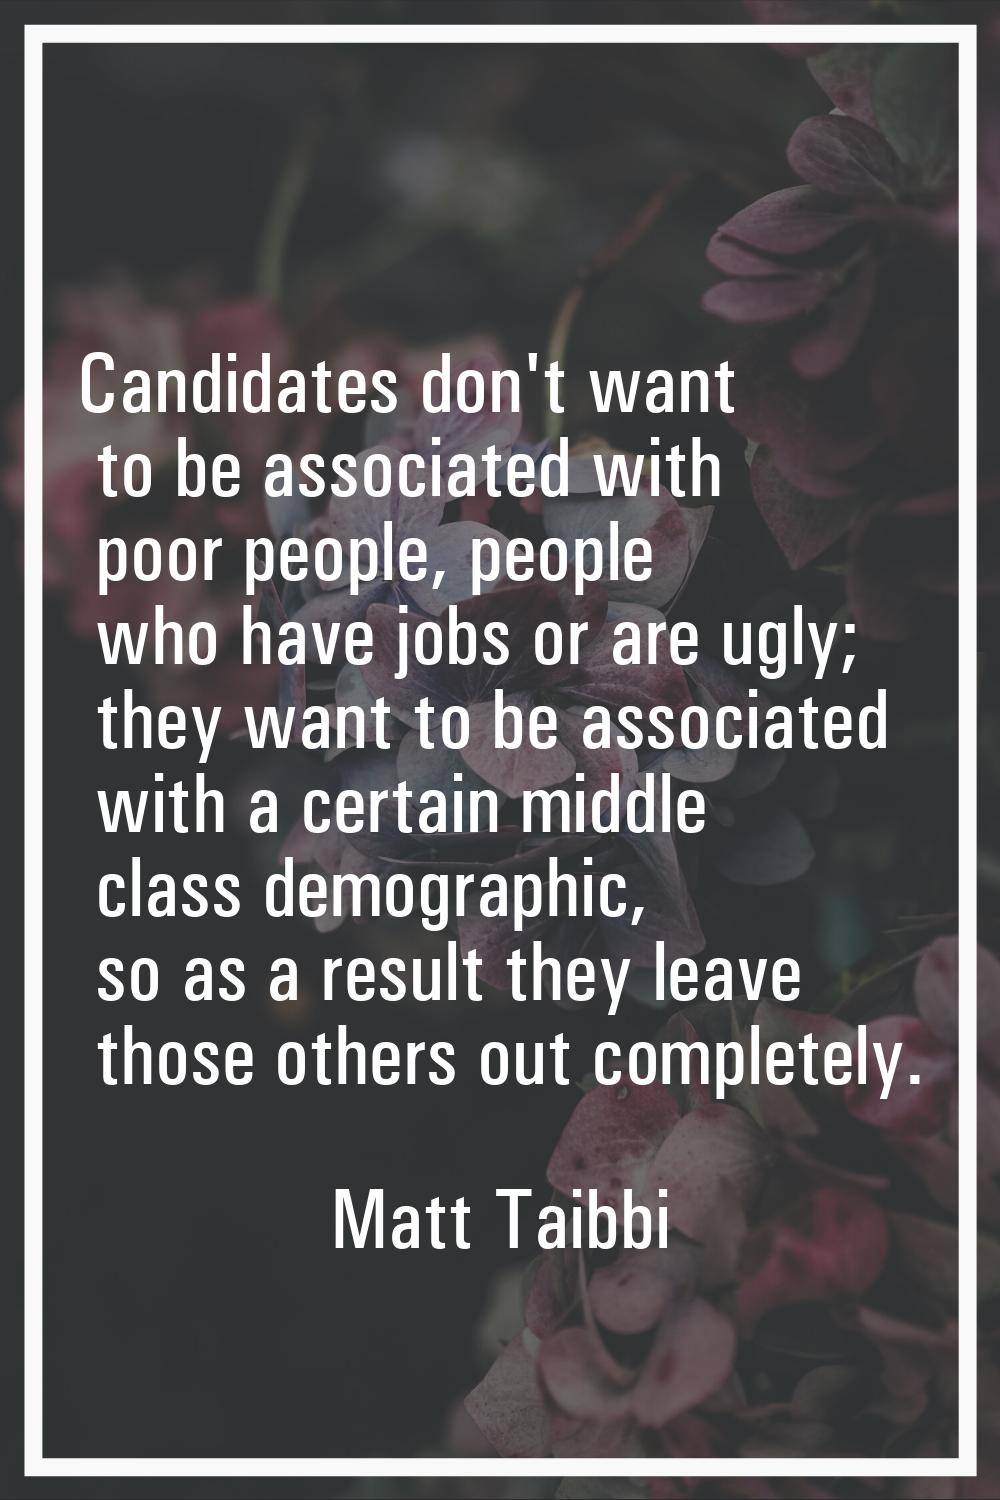 Candidates don't want to be associated with poor people, people who have jobs or are ugly; they wan